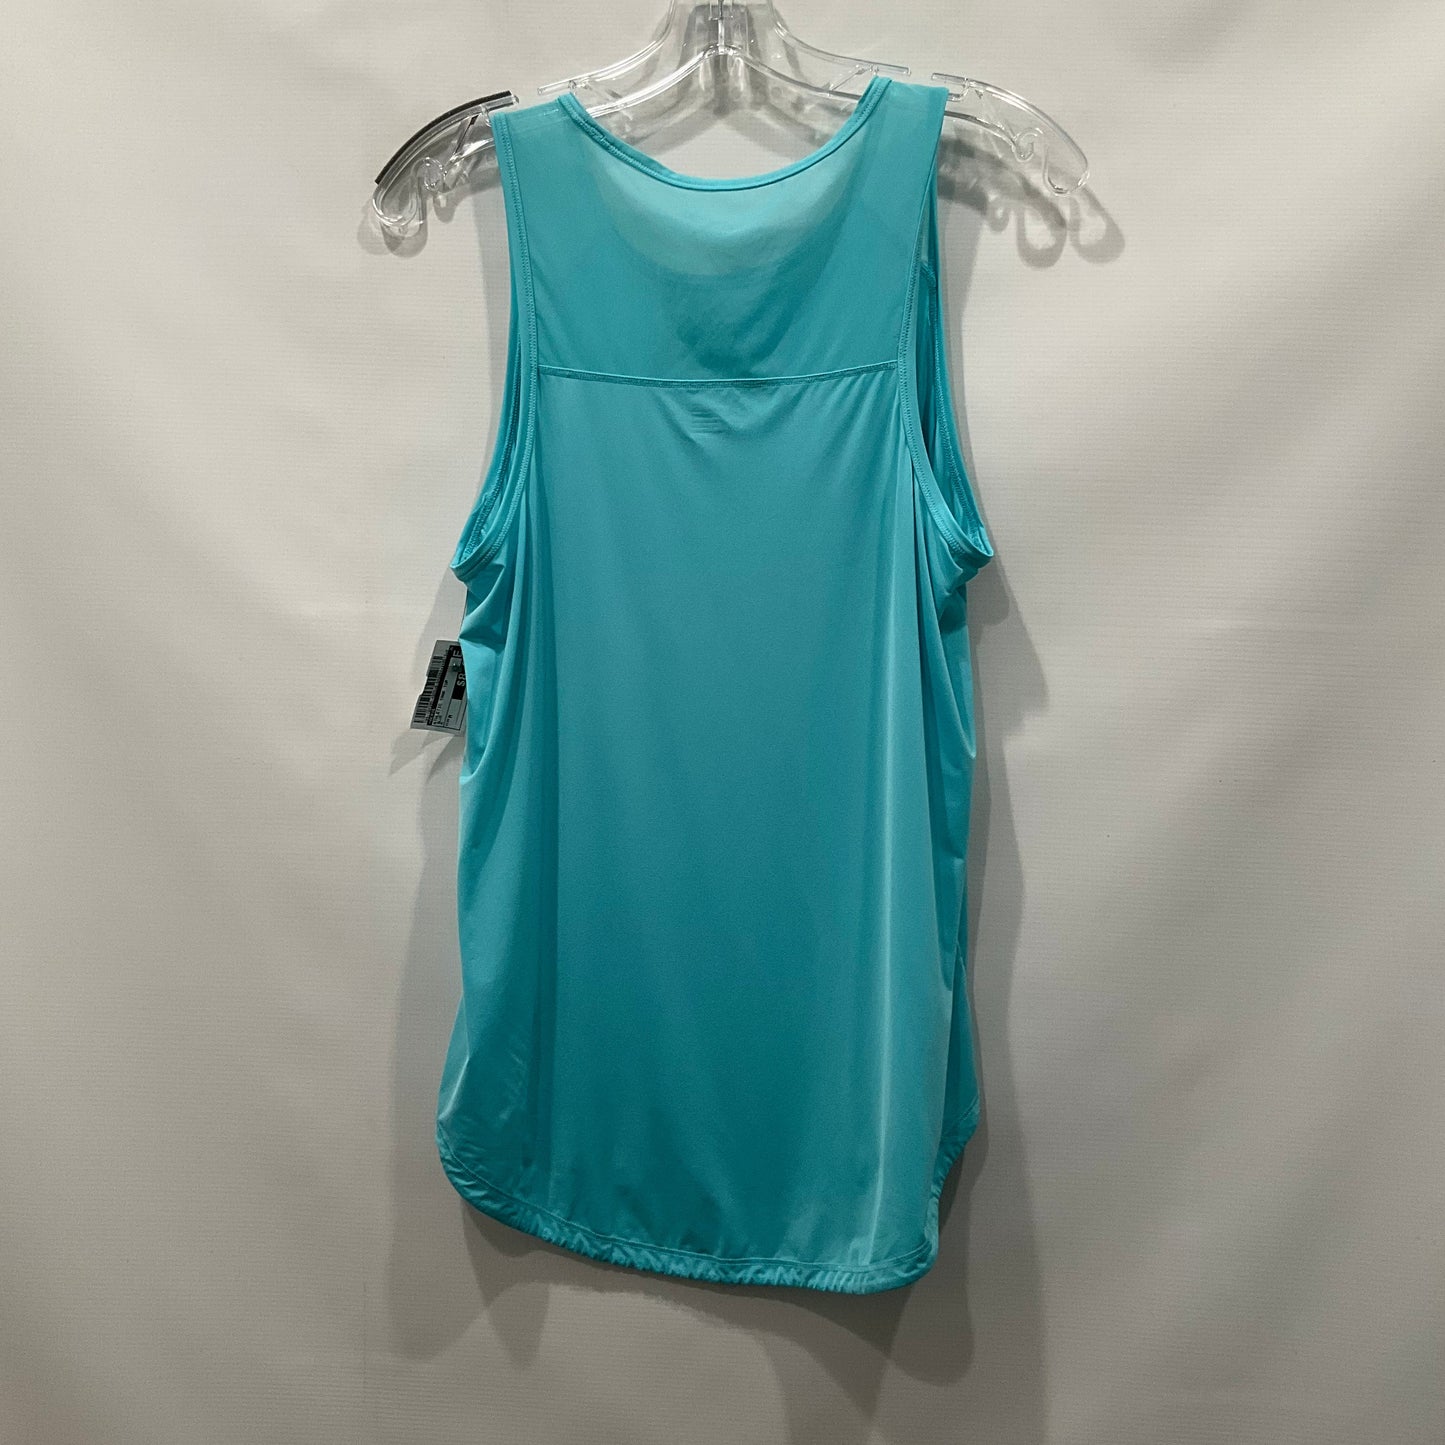 Blue Athletic Tank Top Aerie, Size M